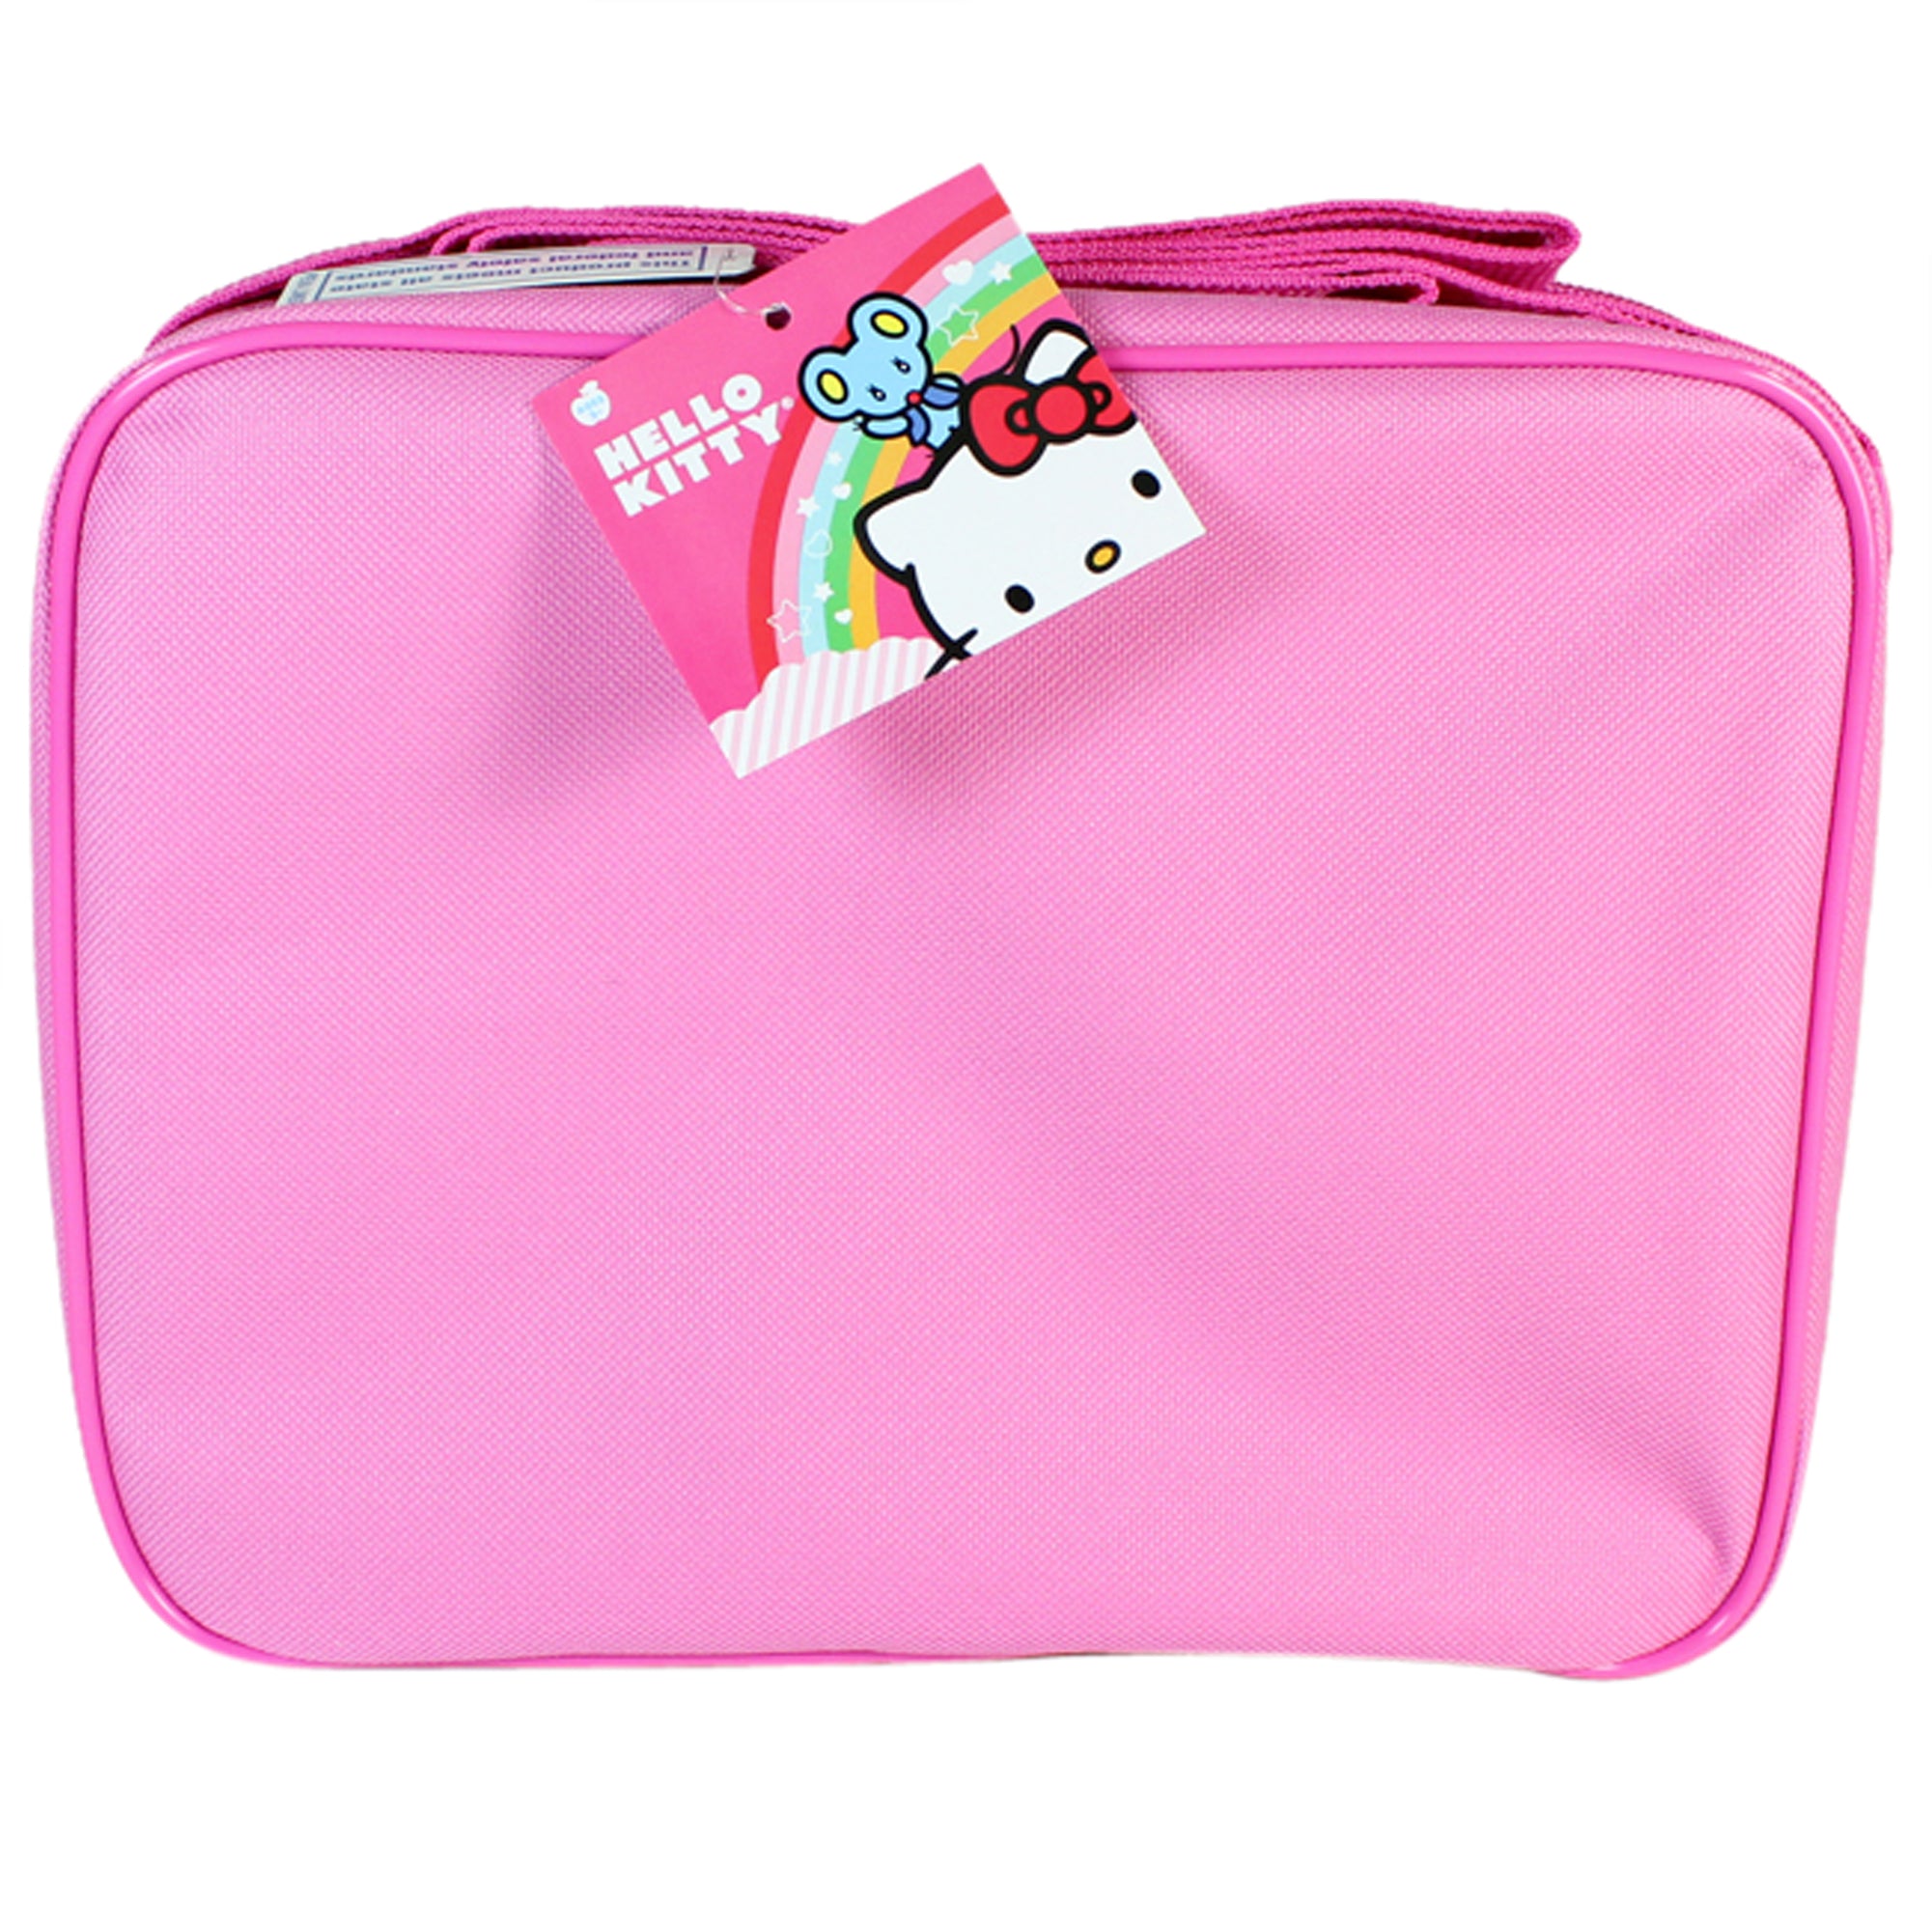 Lunch Bag - Hello Kitty - Pink Star and Dots New Case Girls Gifts Licensed 81401 - image 3 of 4